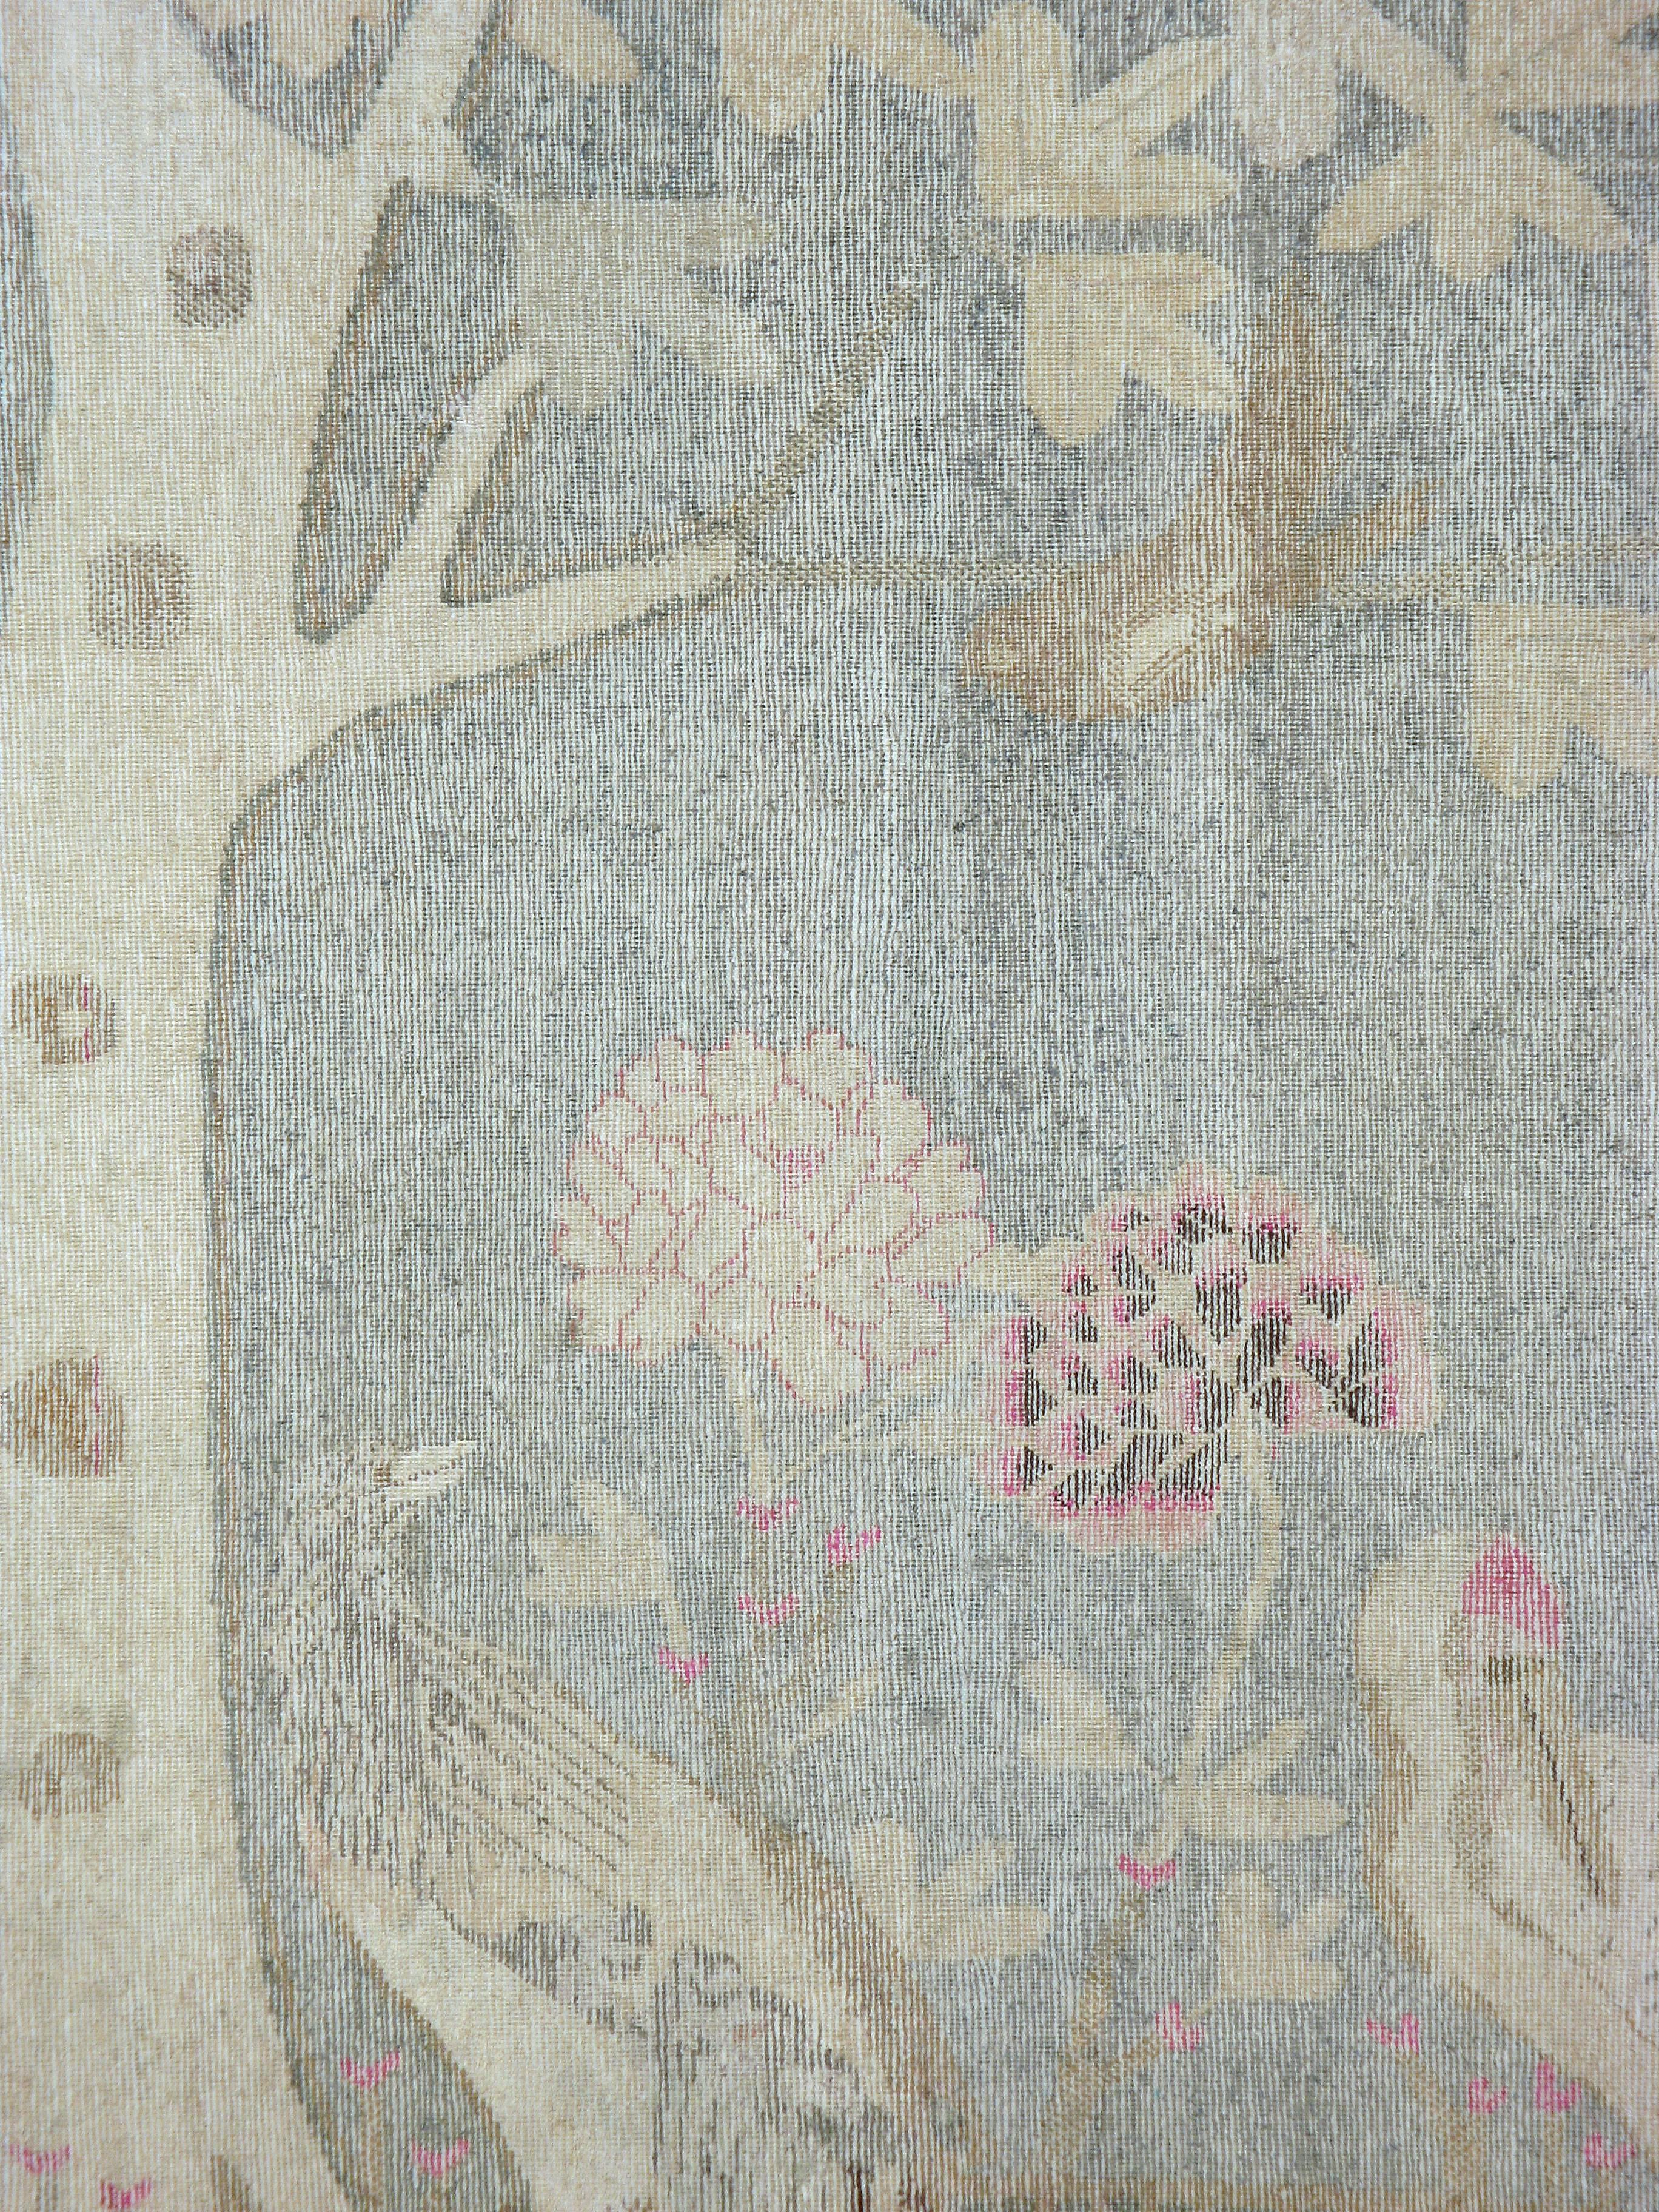 An antique washed East Turkestan Khotan carpet from the first quarter of the 20th century.